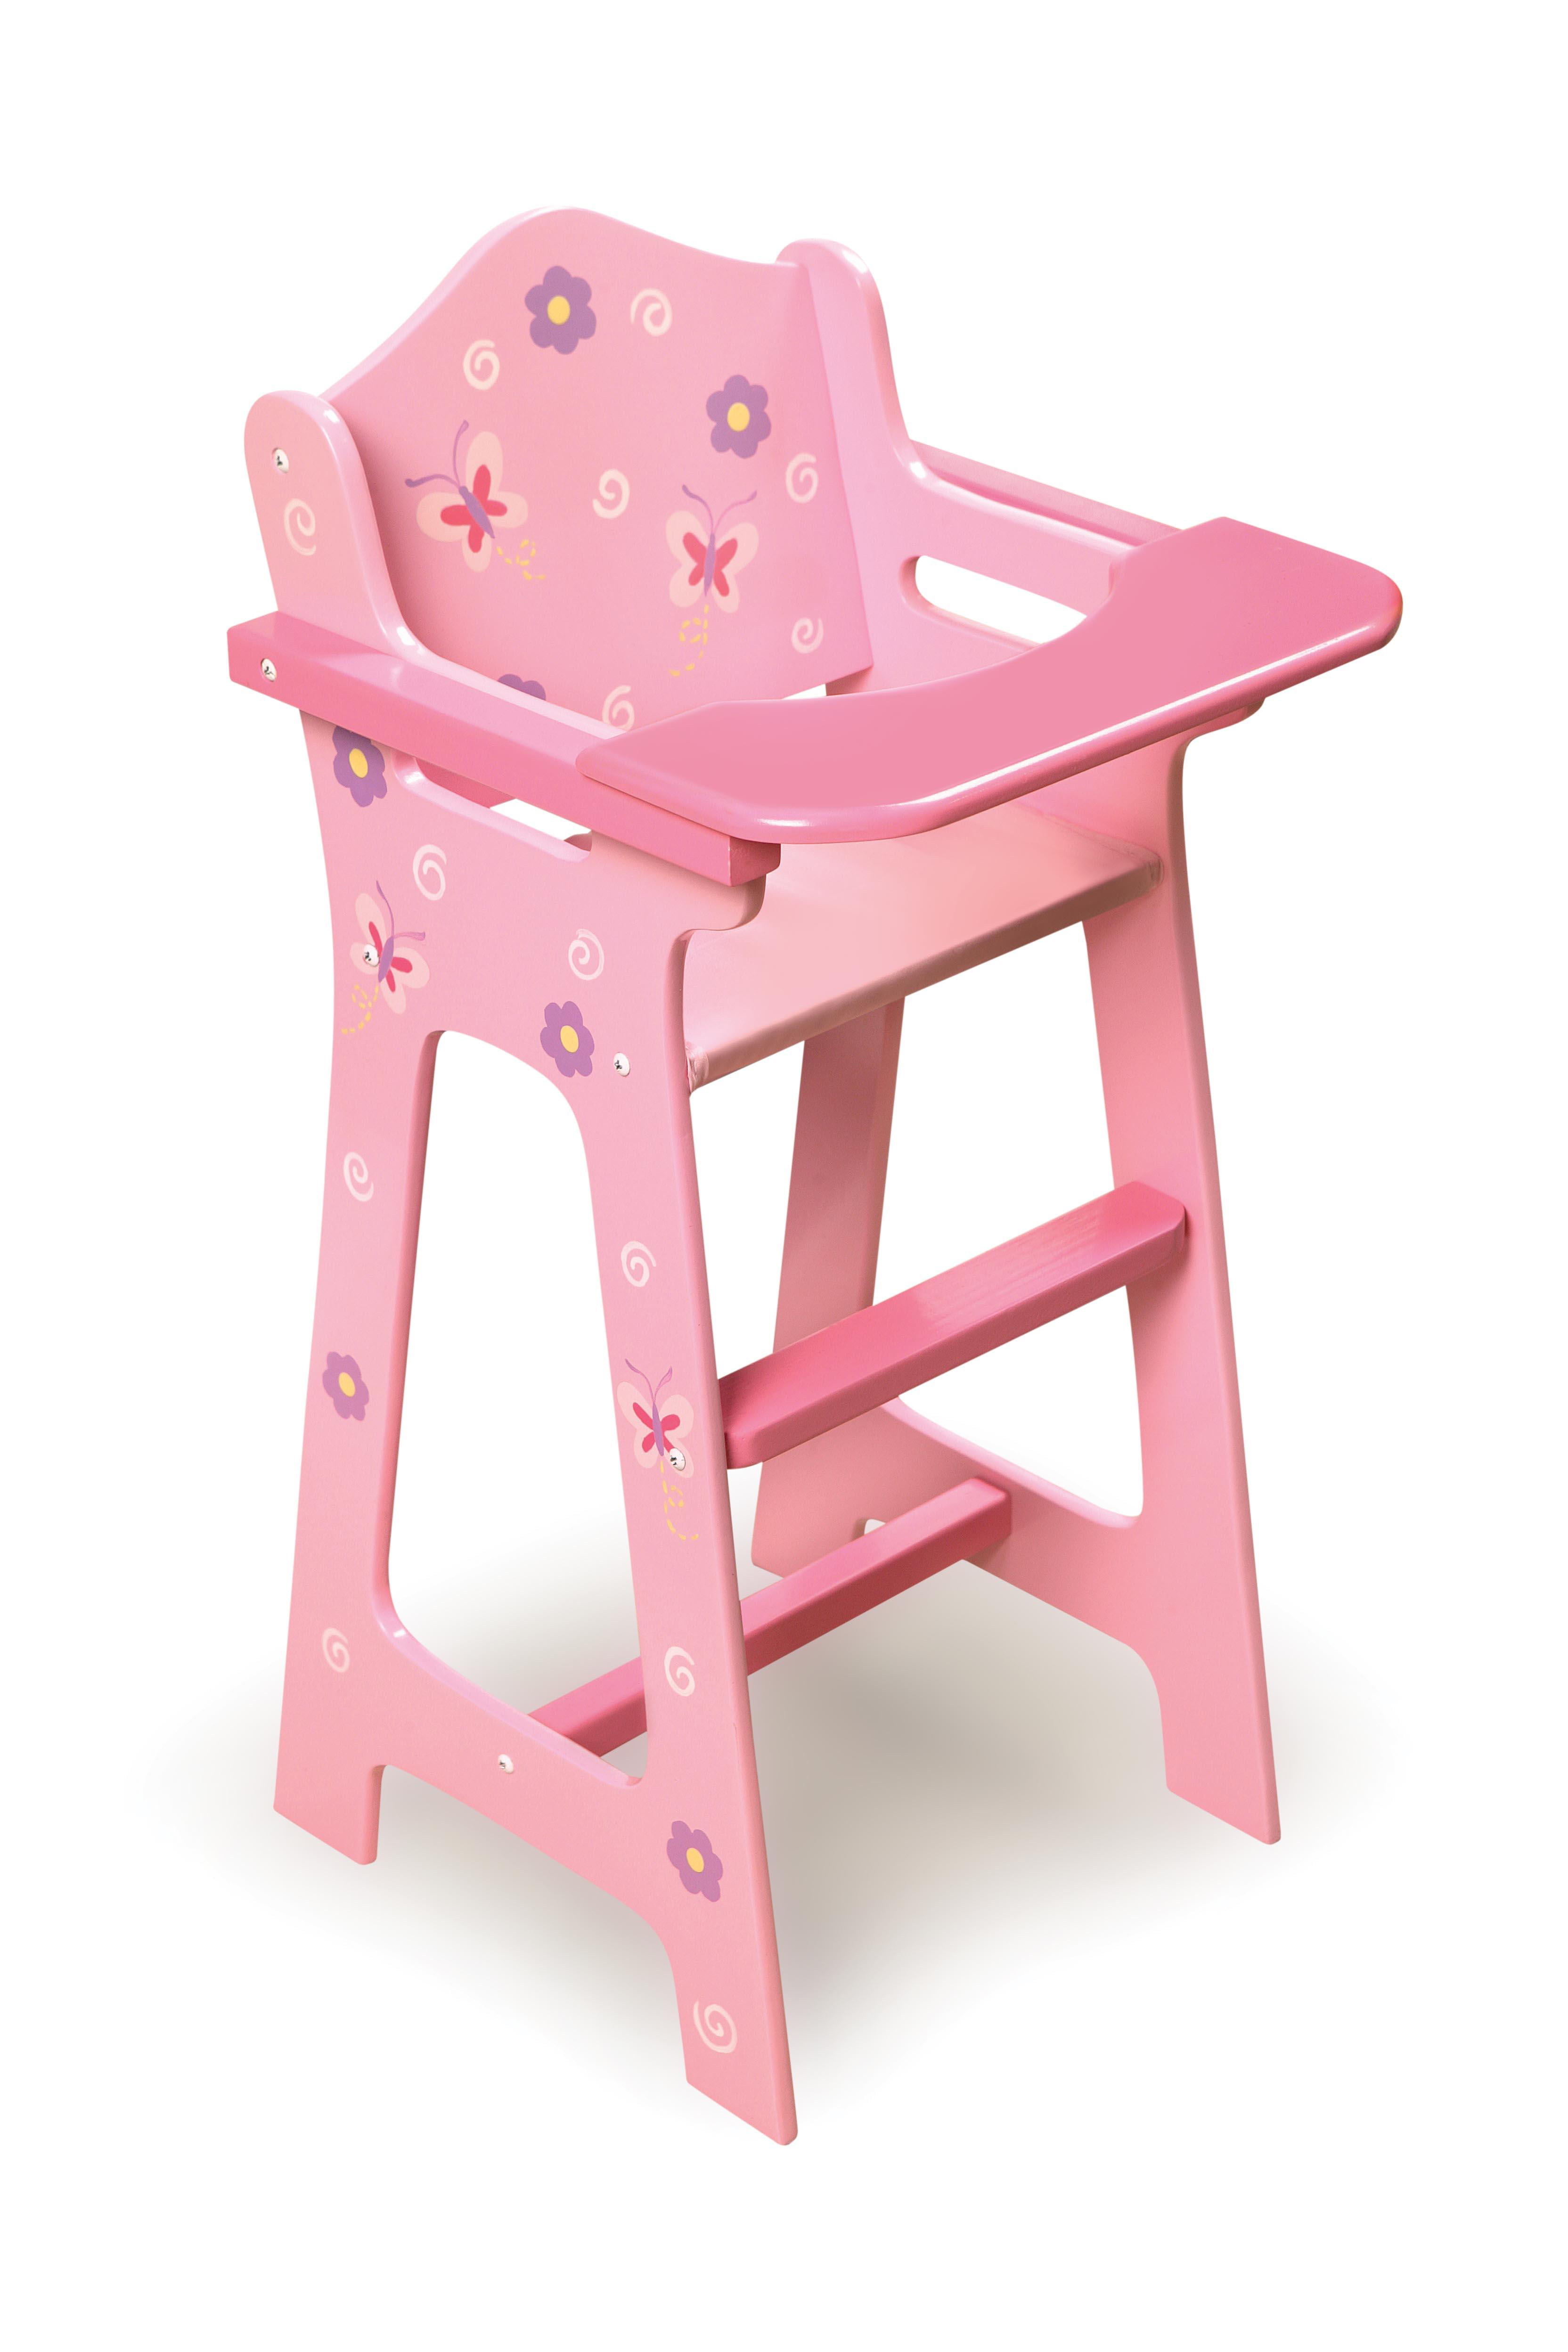 Blossoms Butterflies Doll Set Set High Chair With Bunk Bed